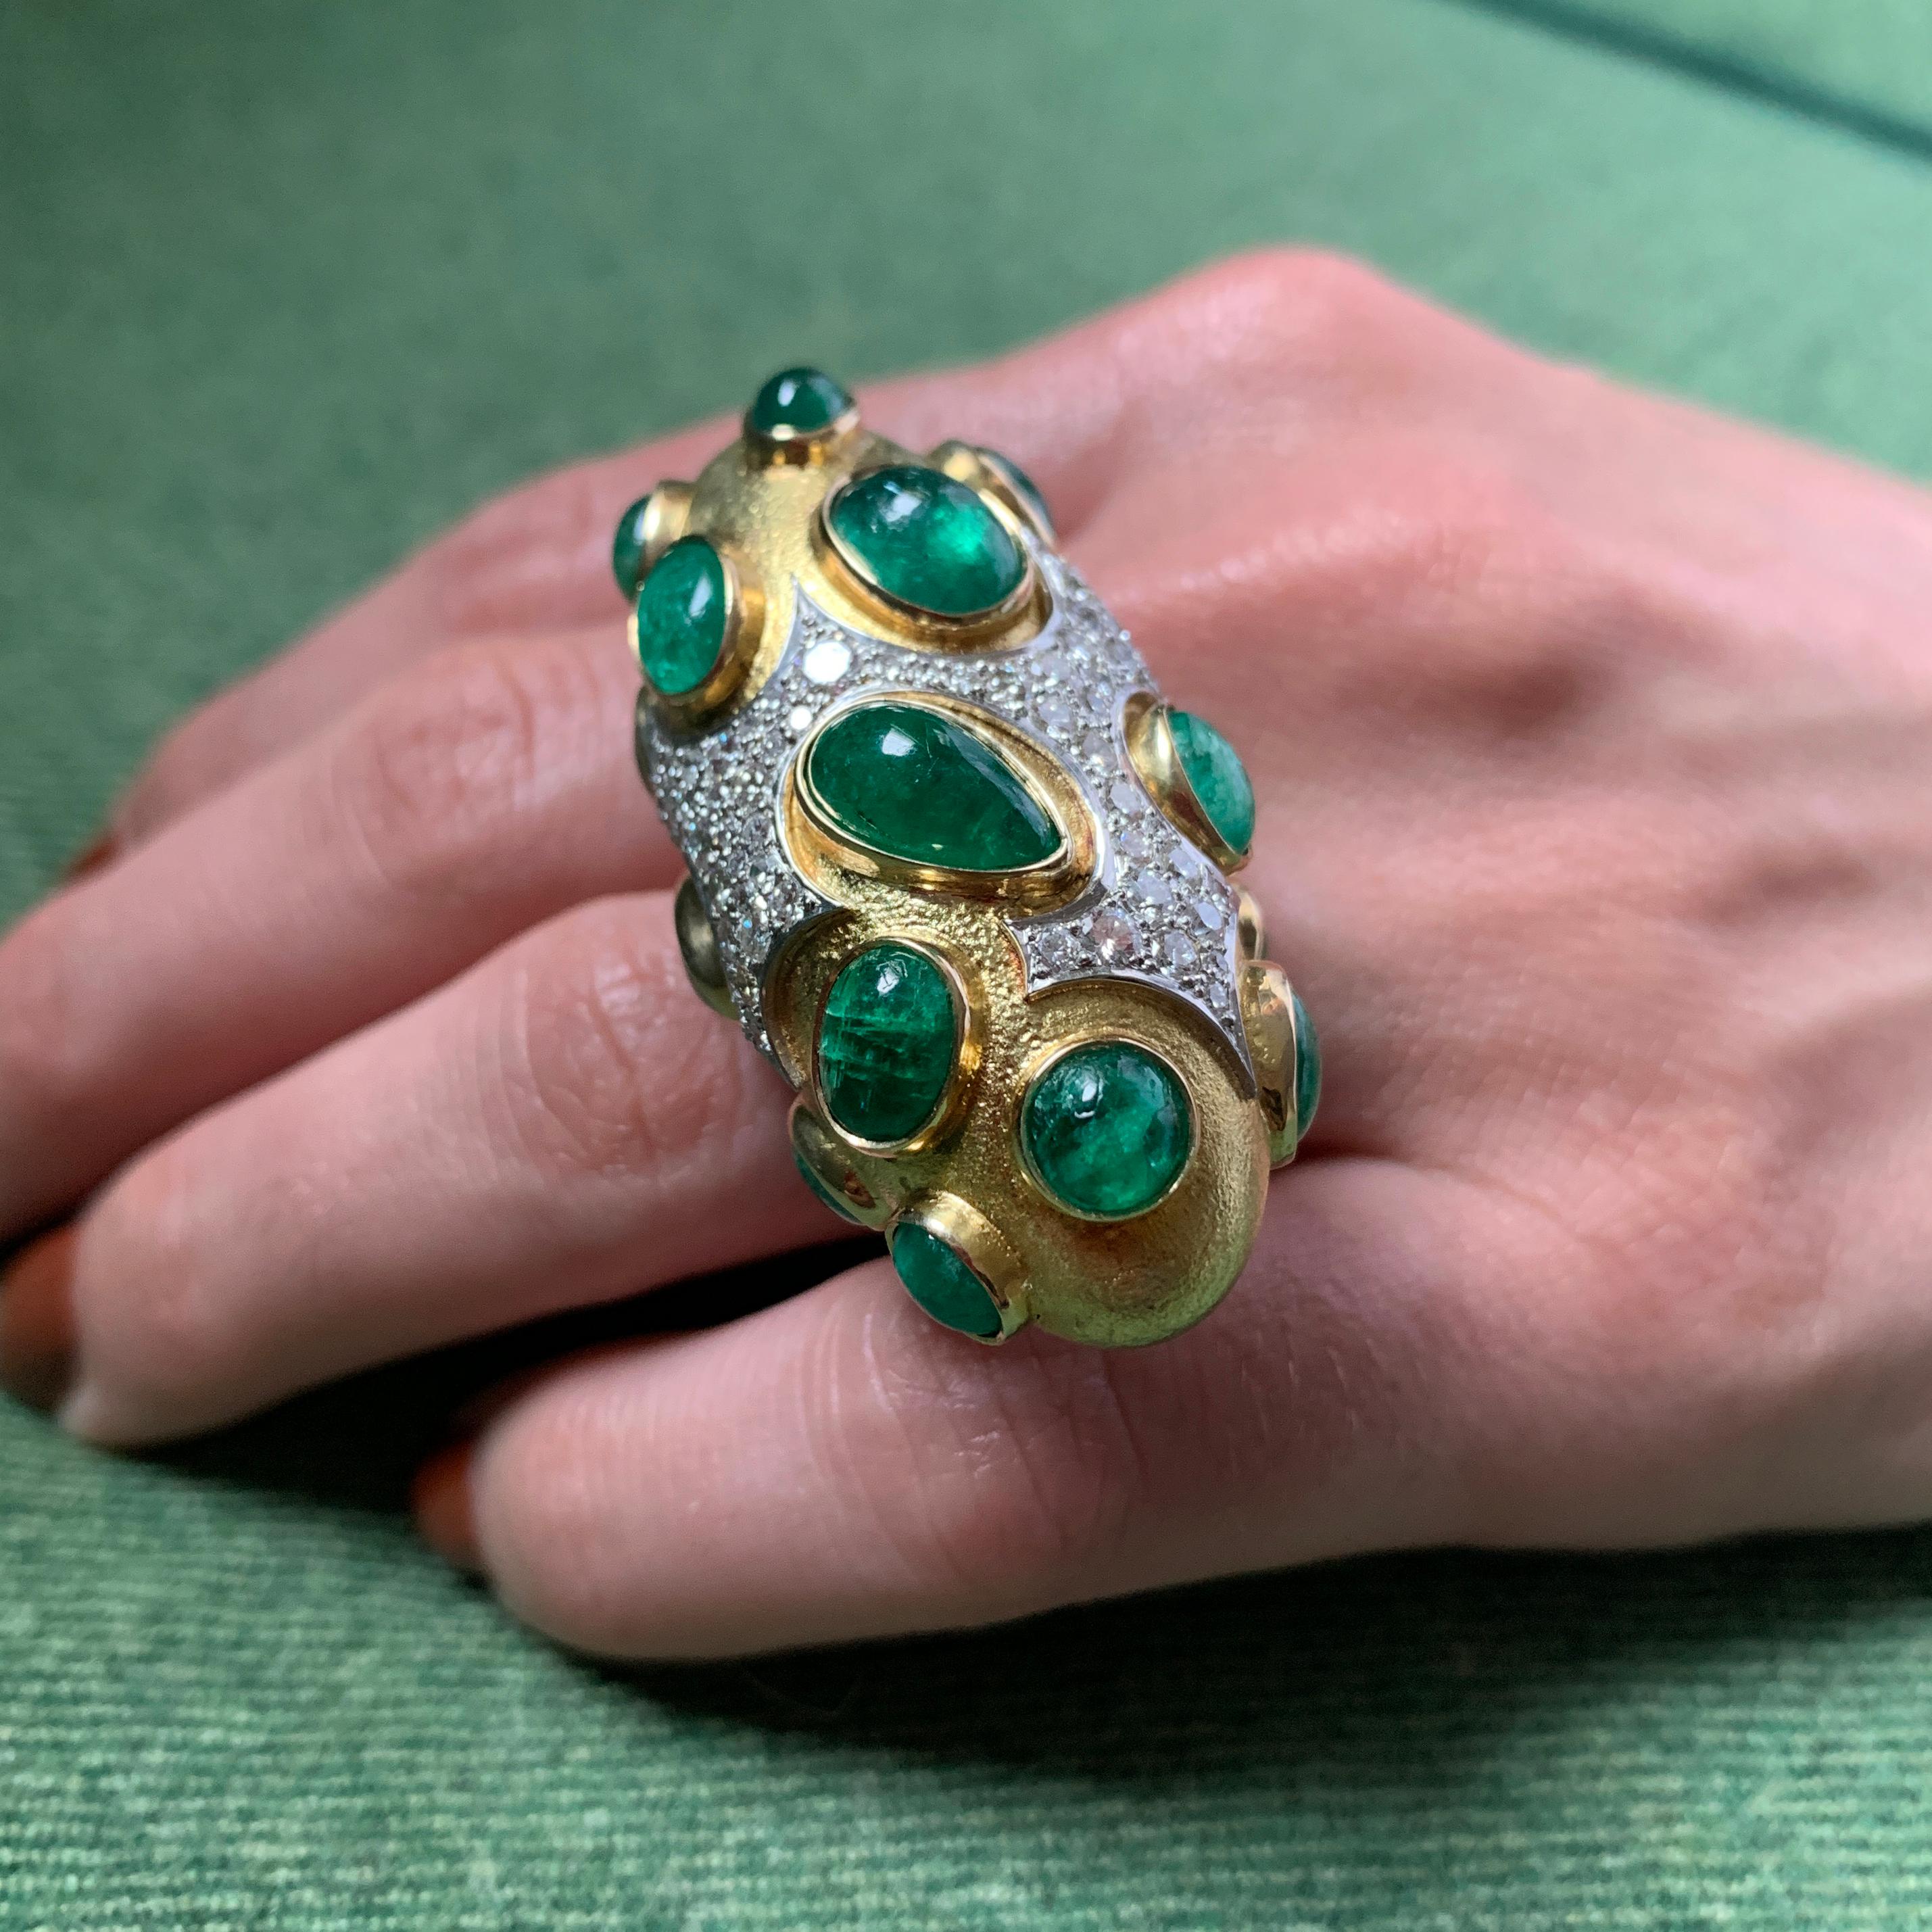 A large ring of Colombian emerald, diamond, and 18 karat yellow gold, by Roger Lucas, 1968, Canada. In its original box. The emerald cabochons have an estimated total weight of 16.00 - 18.00 carats. The round brilliant cut diamonds have an estimated